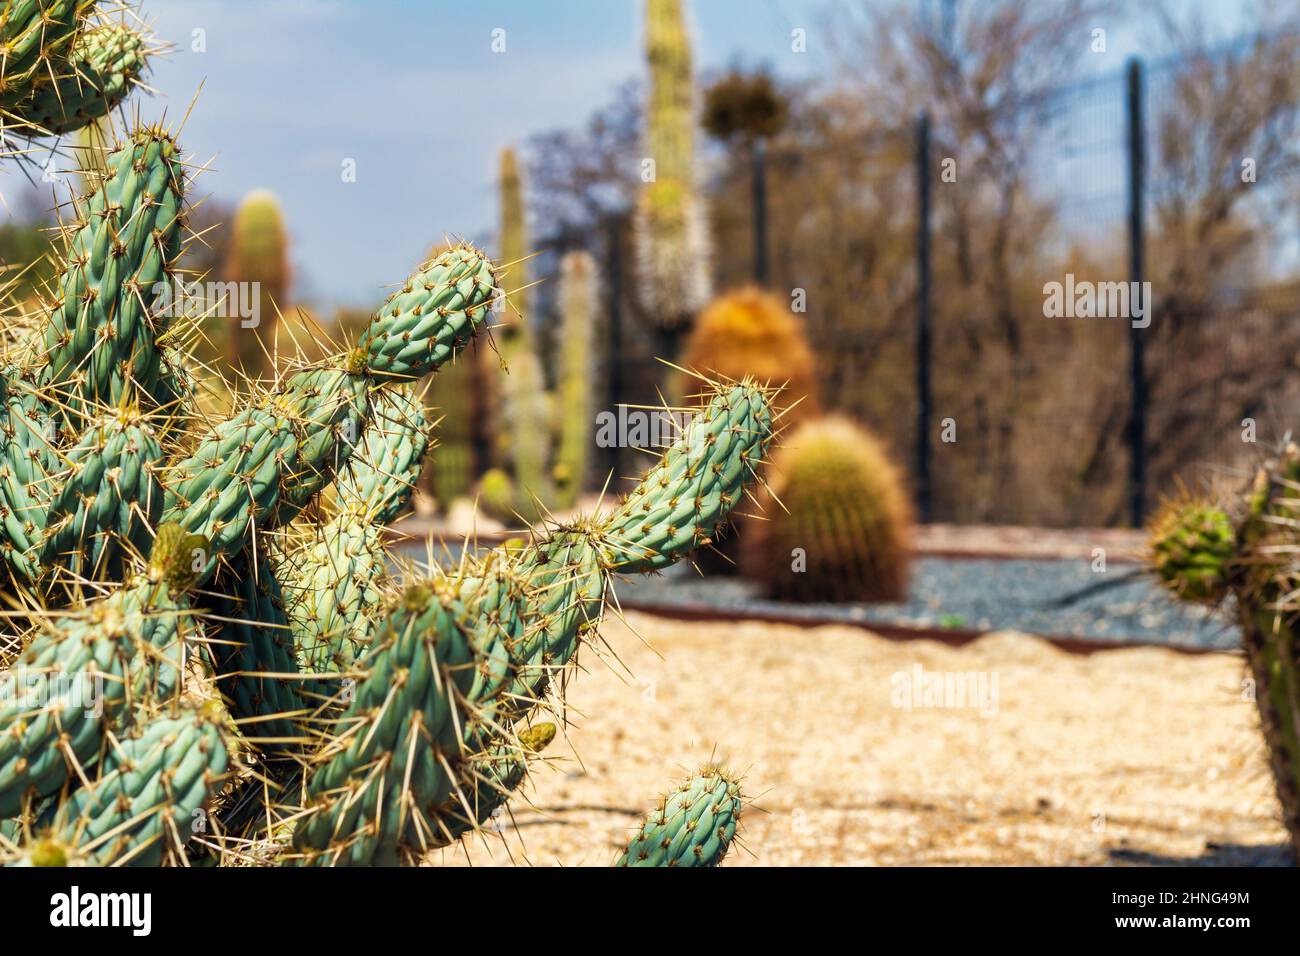 Spiny cactus leaves with a blurred background at the Quilapilun park, Chile. Stock Photo